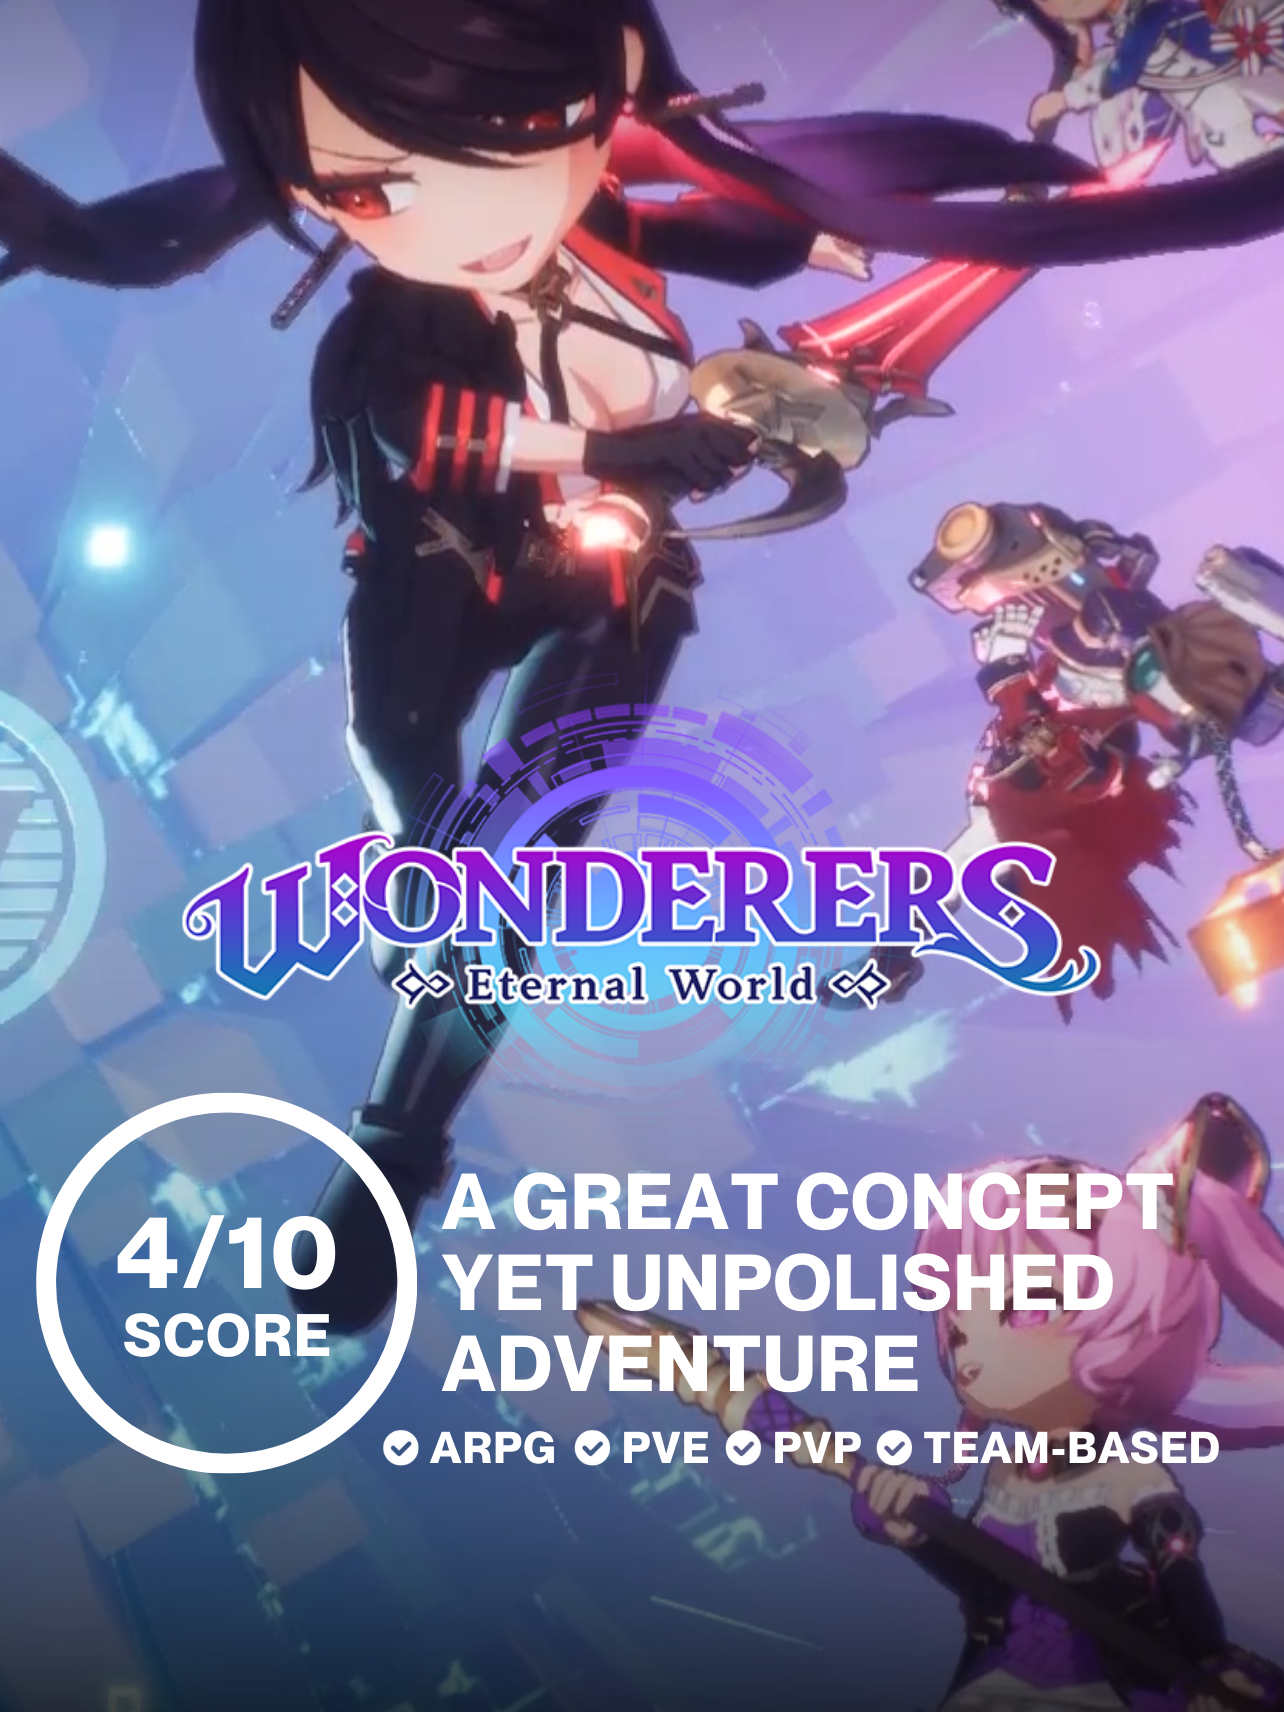 A great concept yet unpolished PvP/PvE adventure | Review - Wonderers:Eternal World